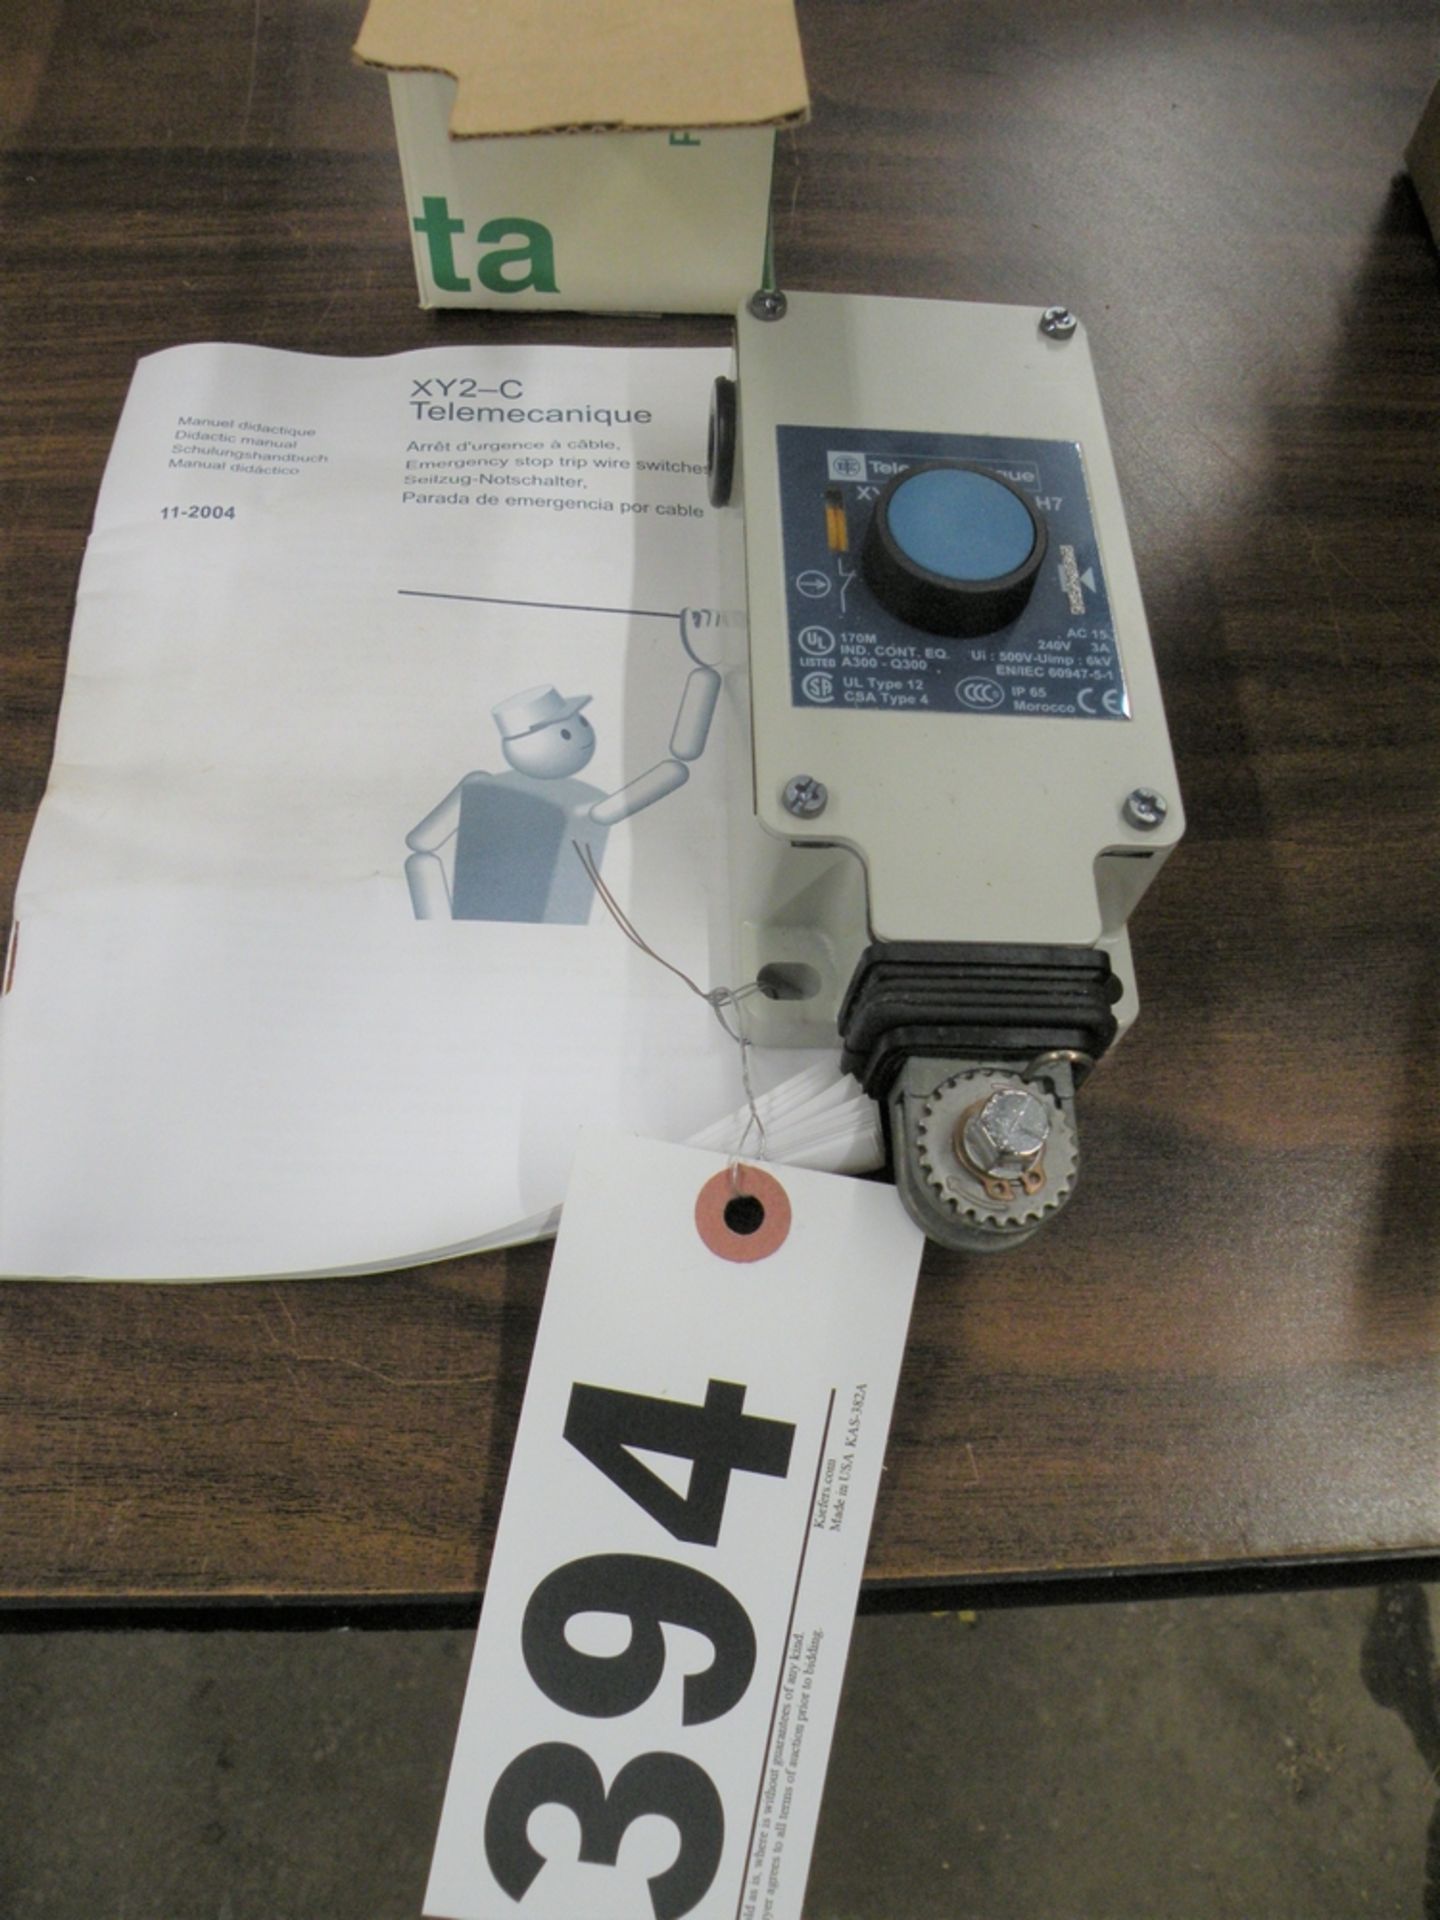 Telemecanique XY2-CH H7 Emergency Stop Trip Wire Switch, New in Box (S Fulton, TN) - Image 2 of 3